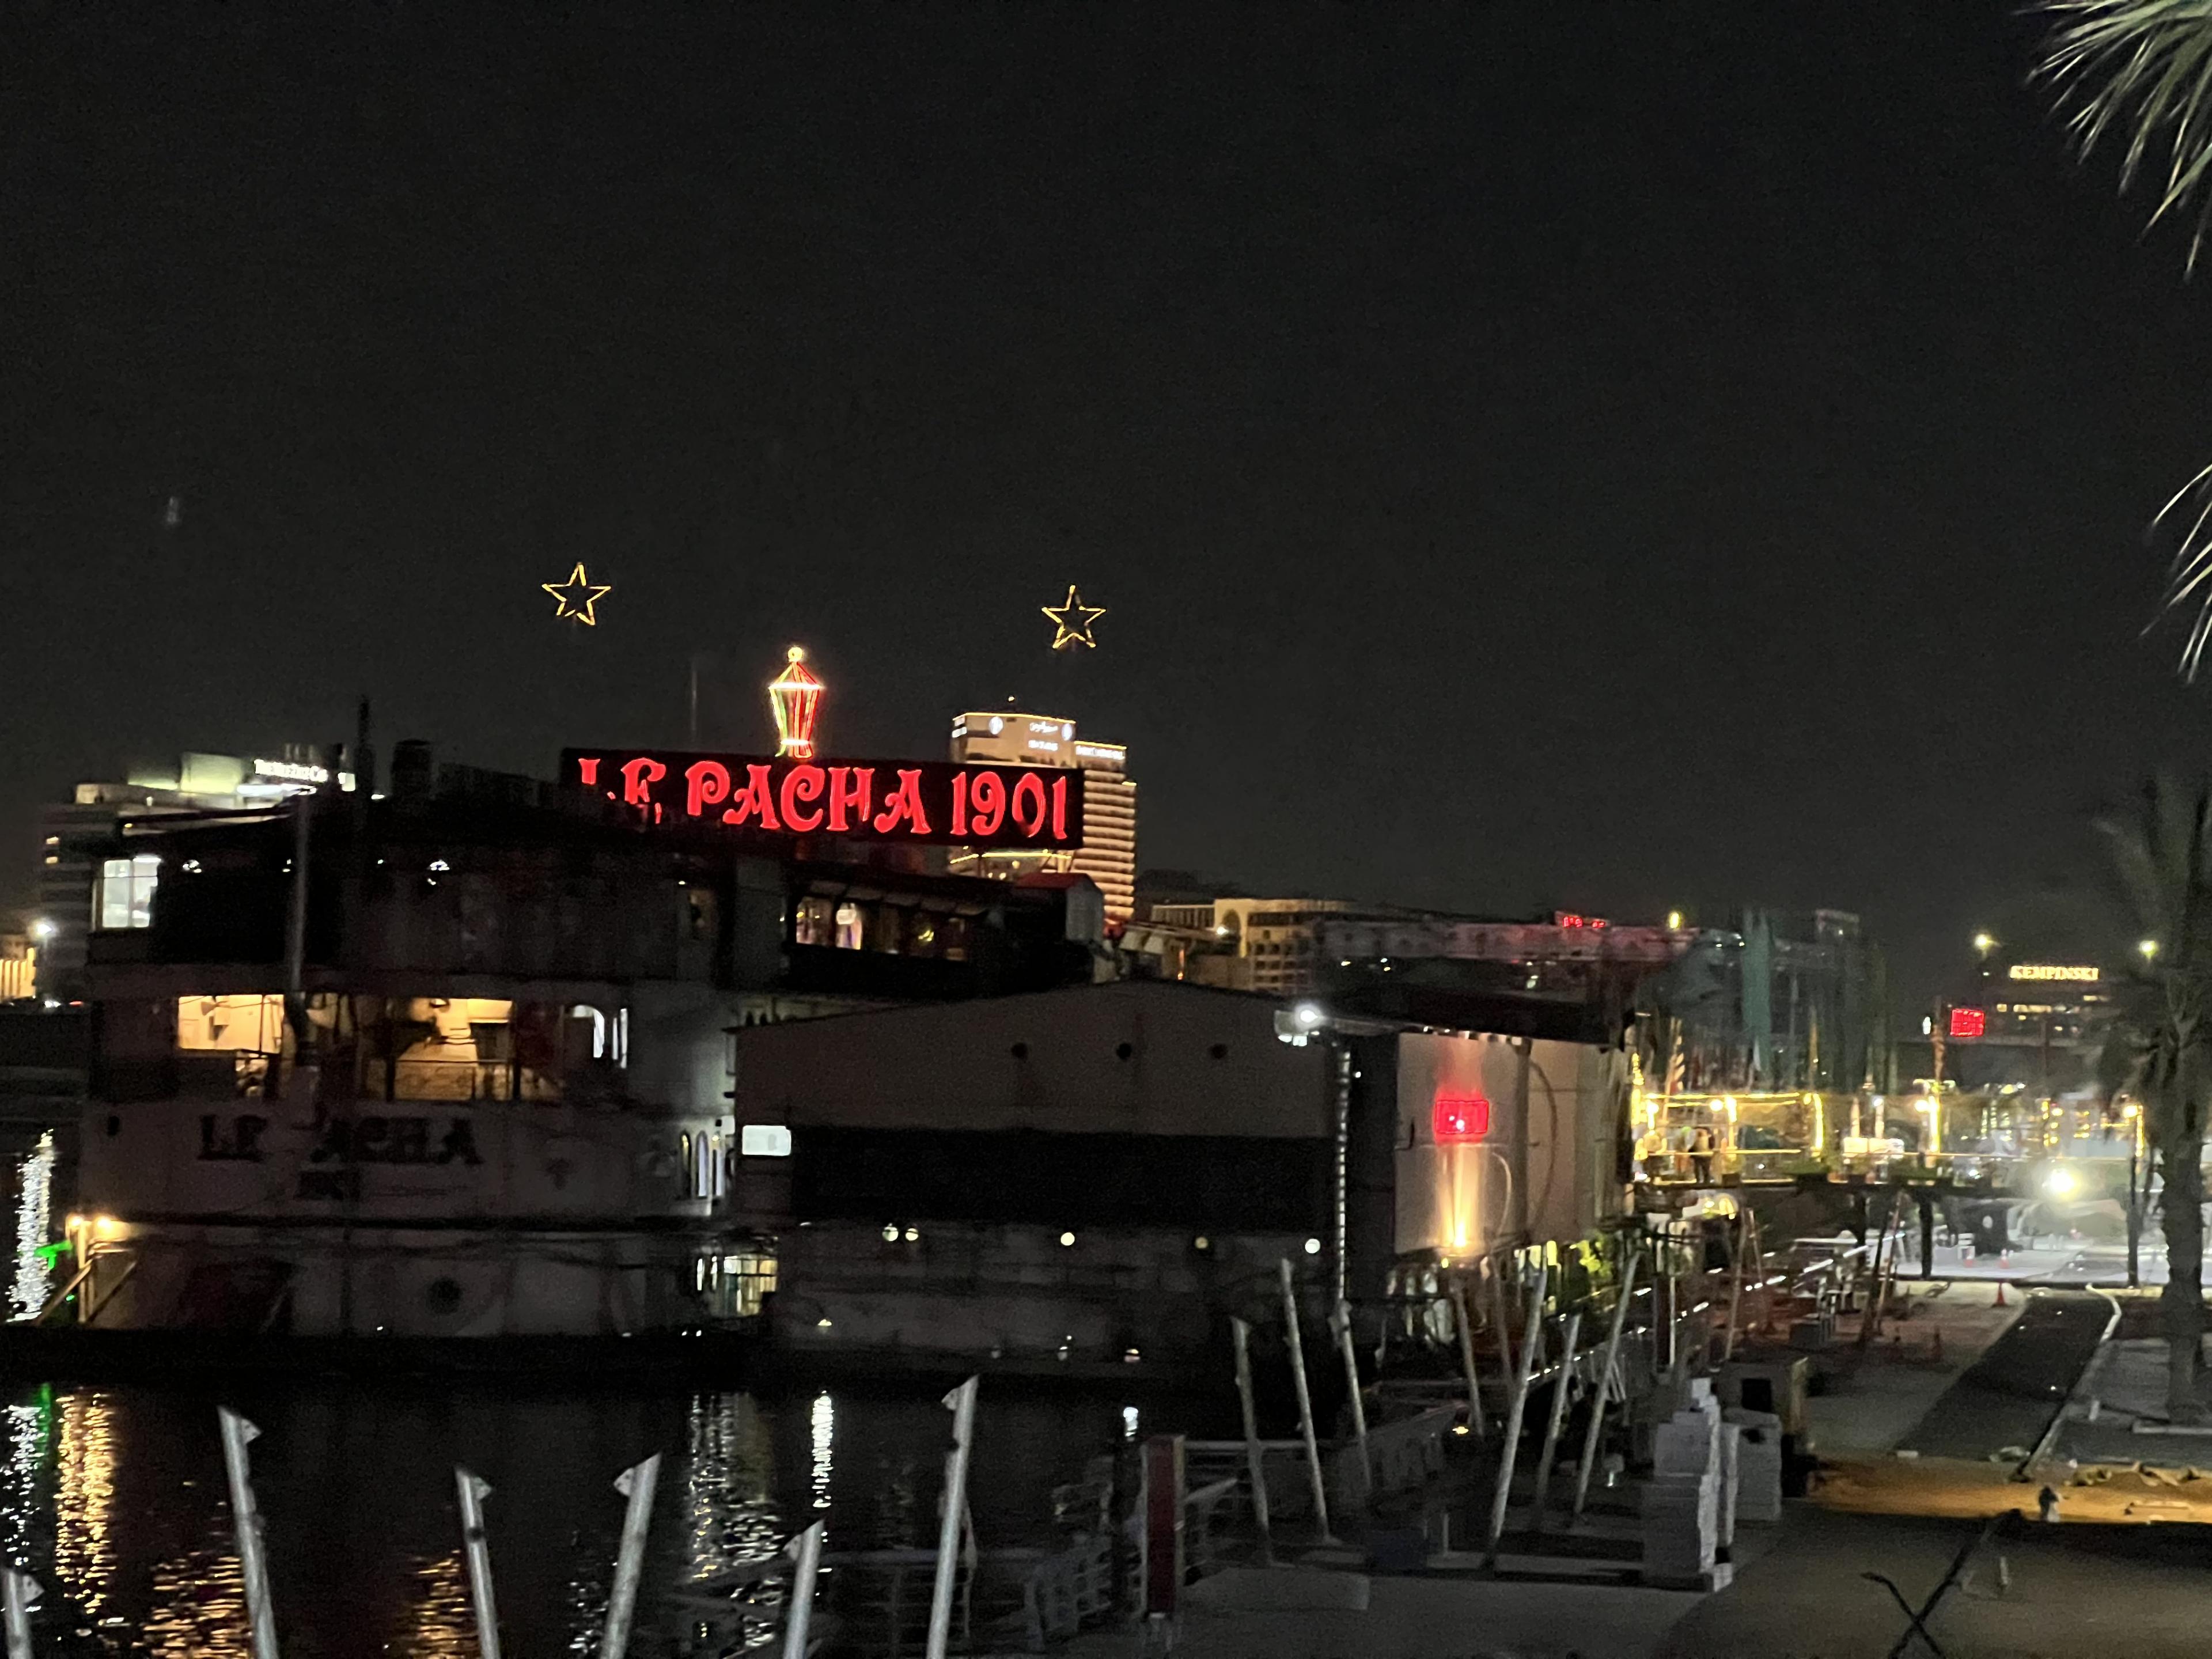 sign at night saying al pacha 1901 in red neon lights above water with boats in front of it